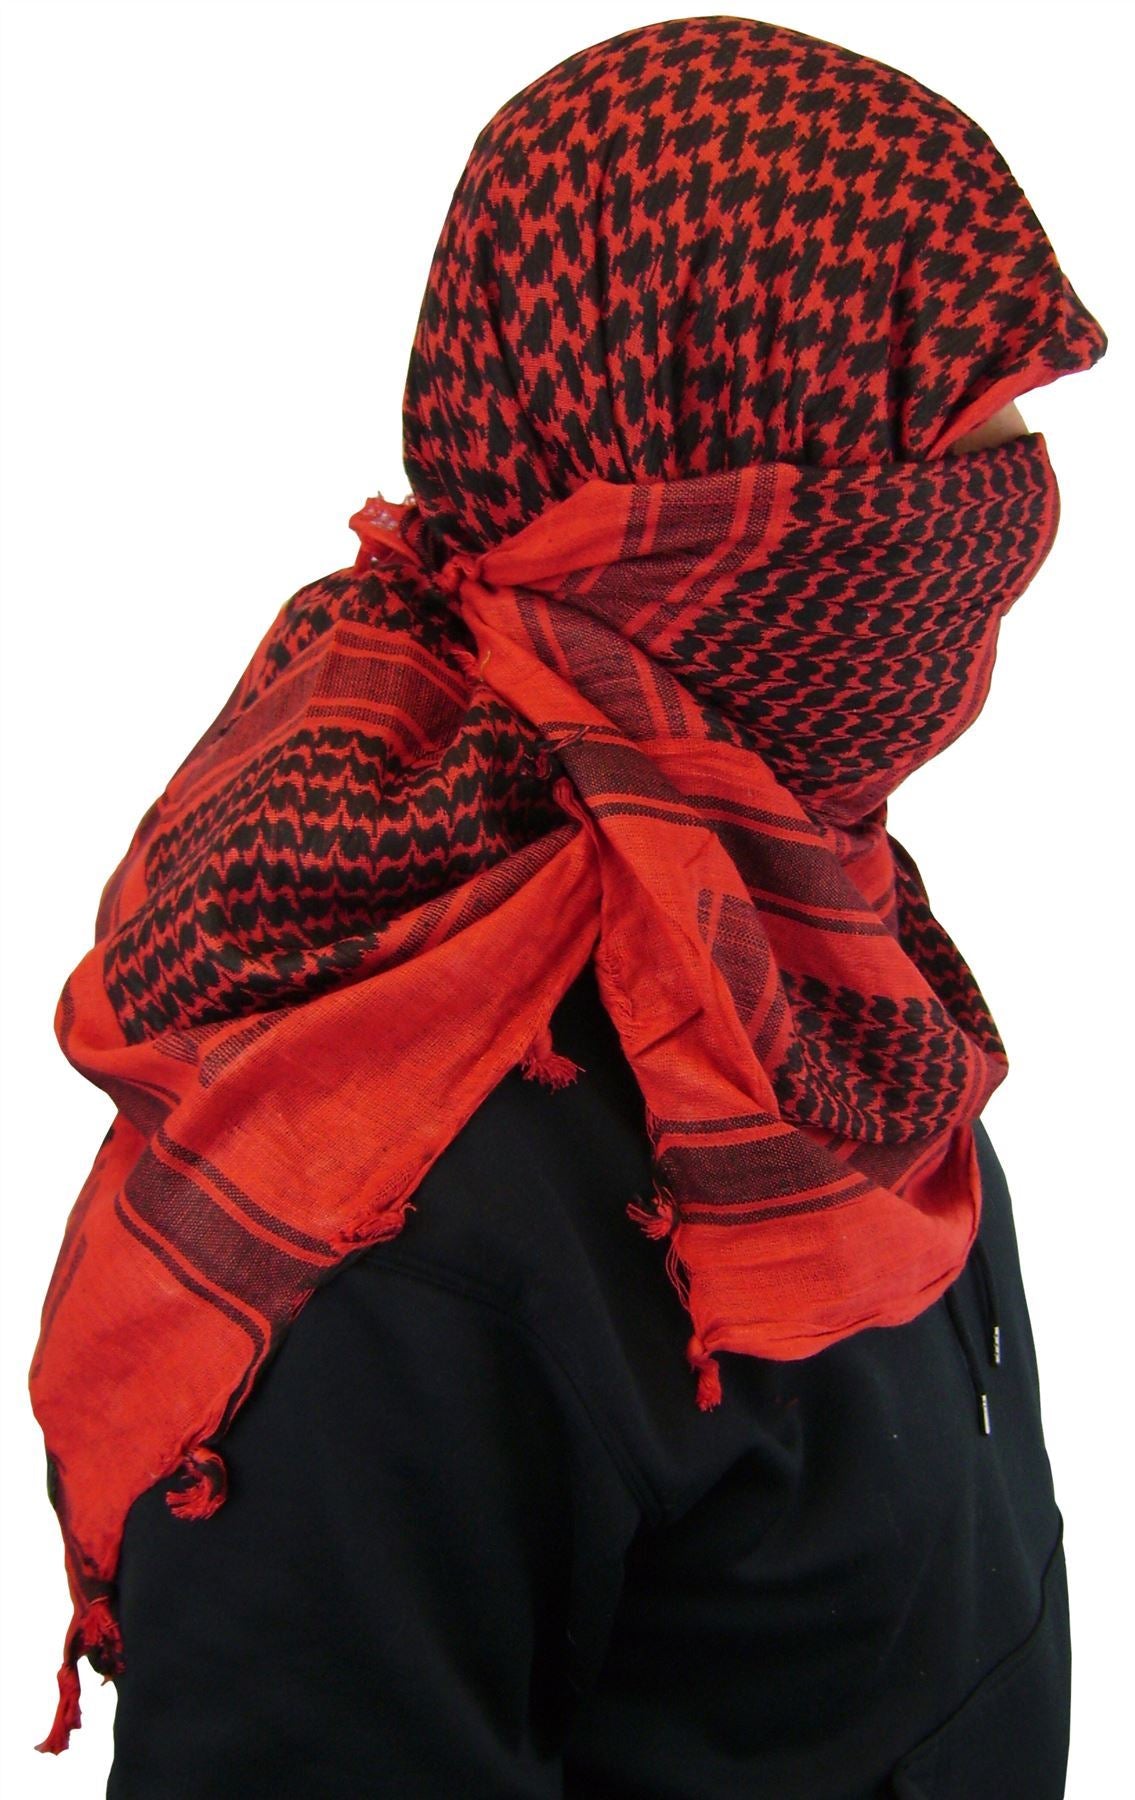 Shemagh Head Wrap Red/BLK